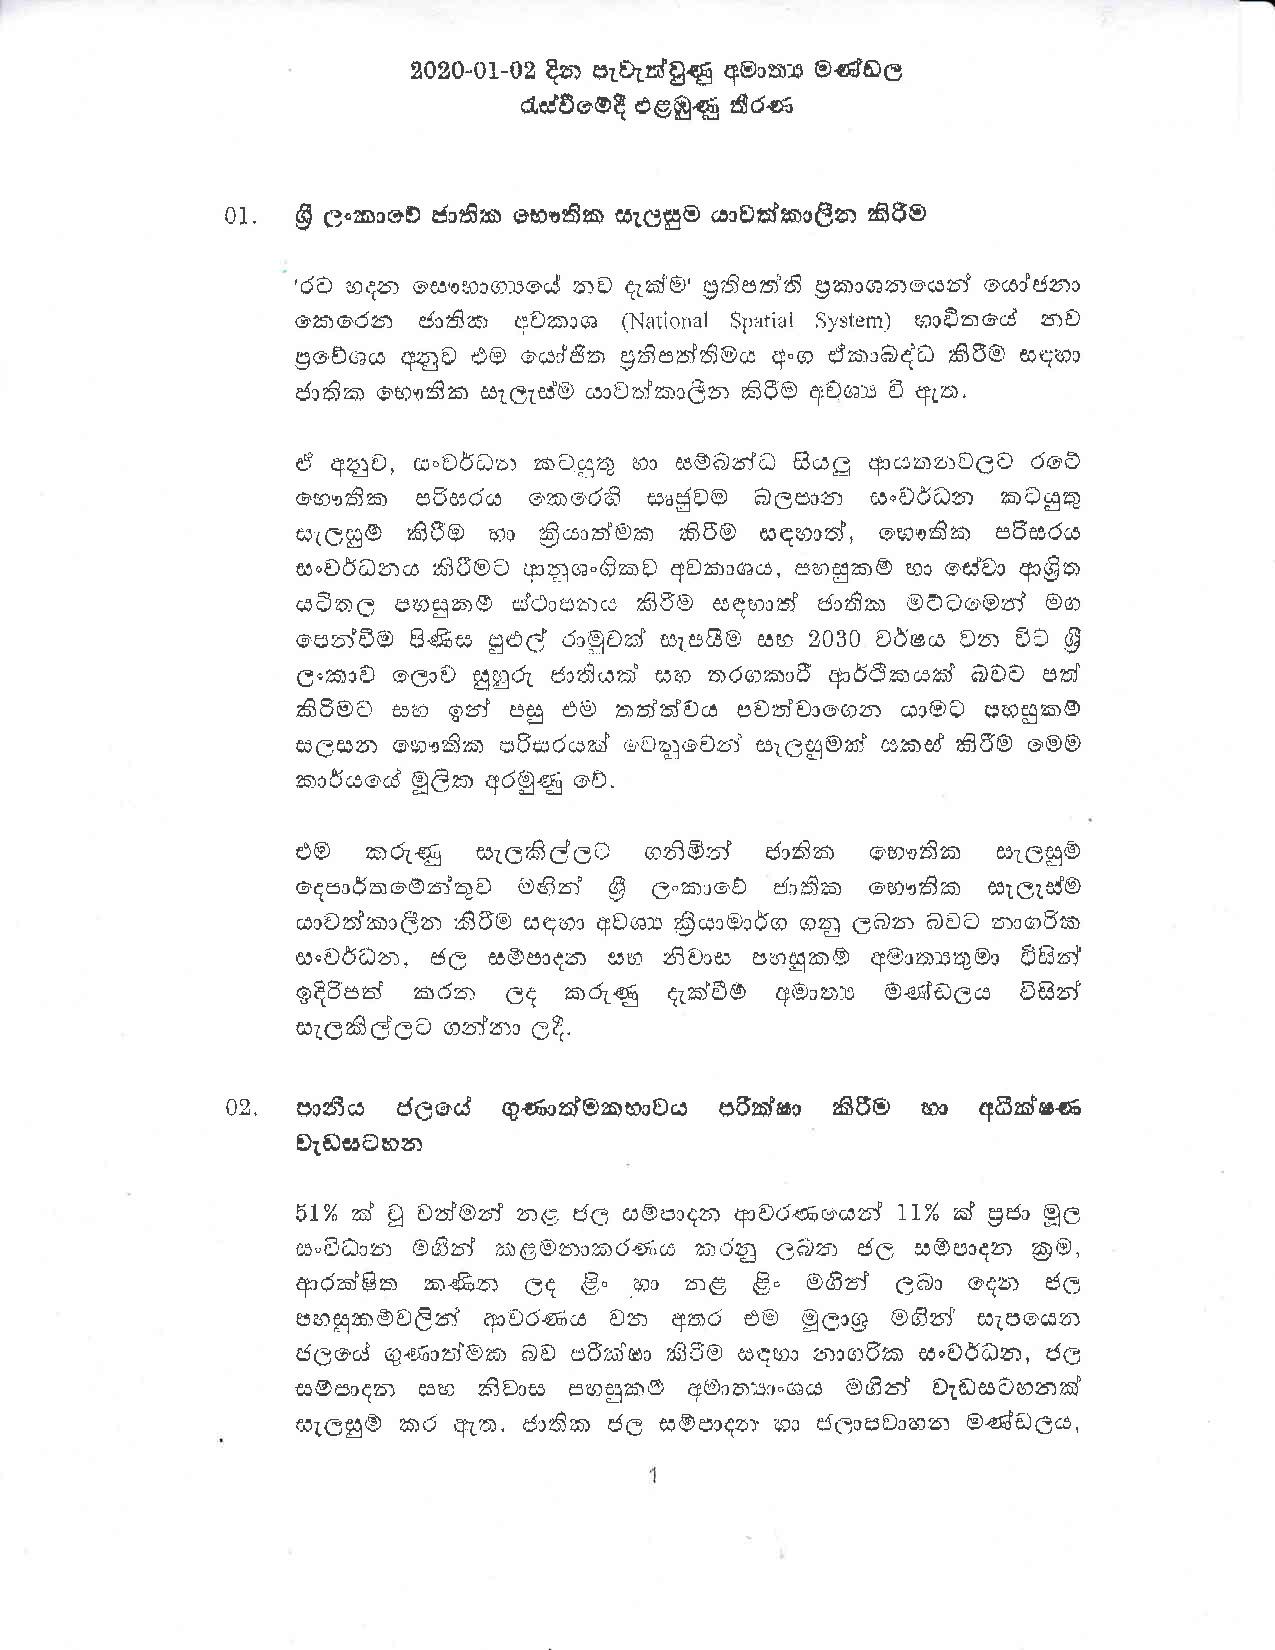 Cabinet Decision on 02.01.2020 1 page 001